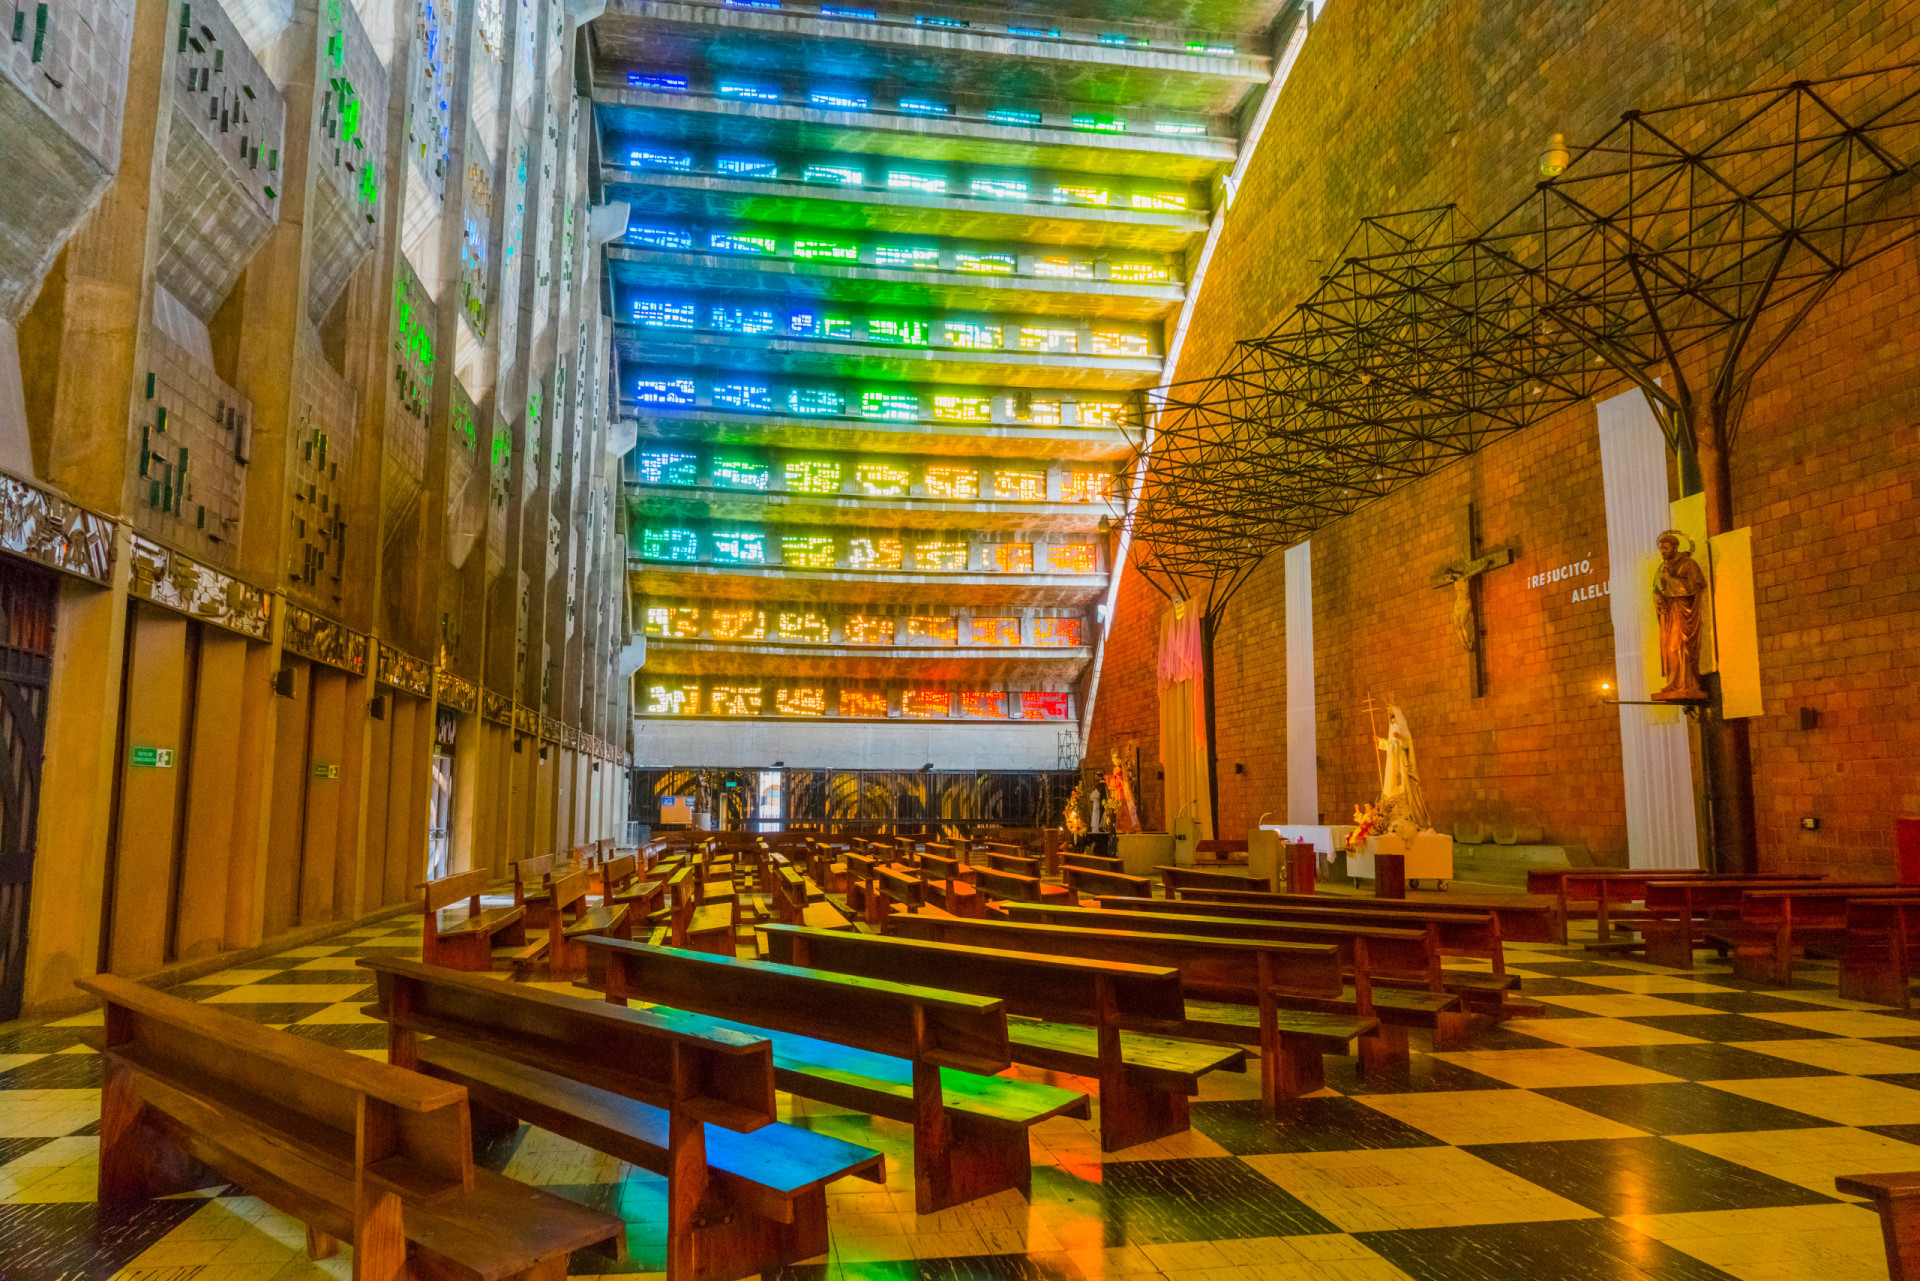 <p>El Salvador's capital city, San Salvador, has plenty to distract the visitor, with the Church of the Rosary surely one of the most compelling sights. Designed by sculptor Ruben Martinez and completed in 1971, this is arguably the finest church in Central America.</p> <p>Sources: (UNESCO) (Britannica) (Global Vision International) </p> <p>See also: <a href="https://www.starsinsider.com/travel/413555/amazing-unesco-world-heritage-sites-in-south-america">Amazing UNESCO World Heritage Sites in South America</a></p>